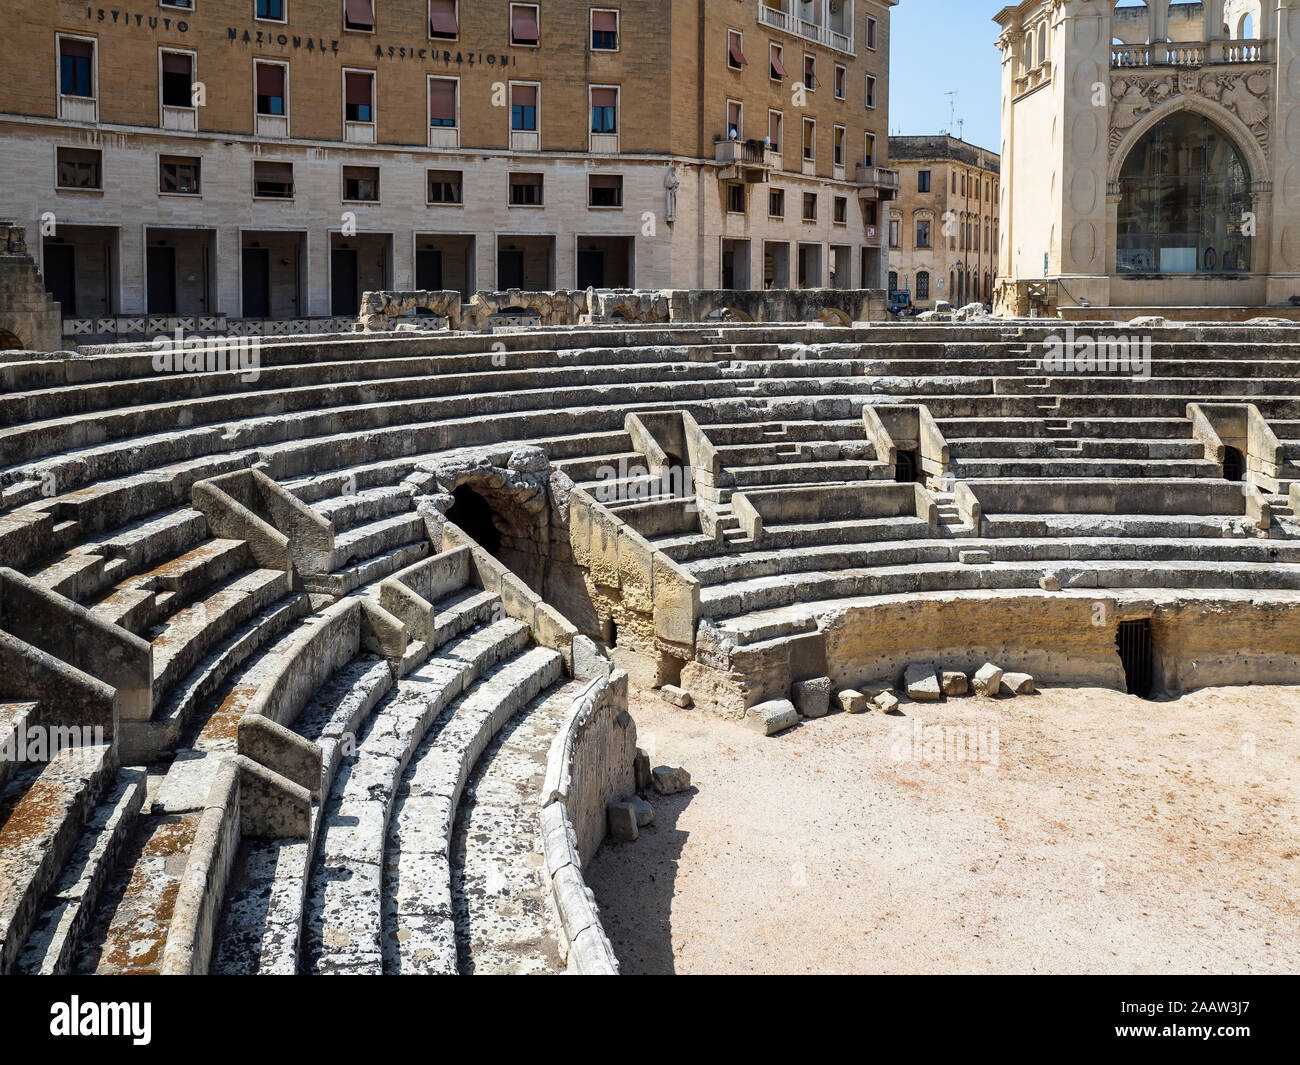 Roman amphitheater against buildings in Altstadt during sunny day, Lecce, Italy Stock Photo